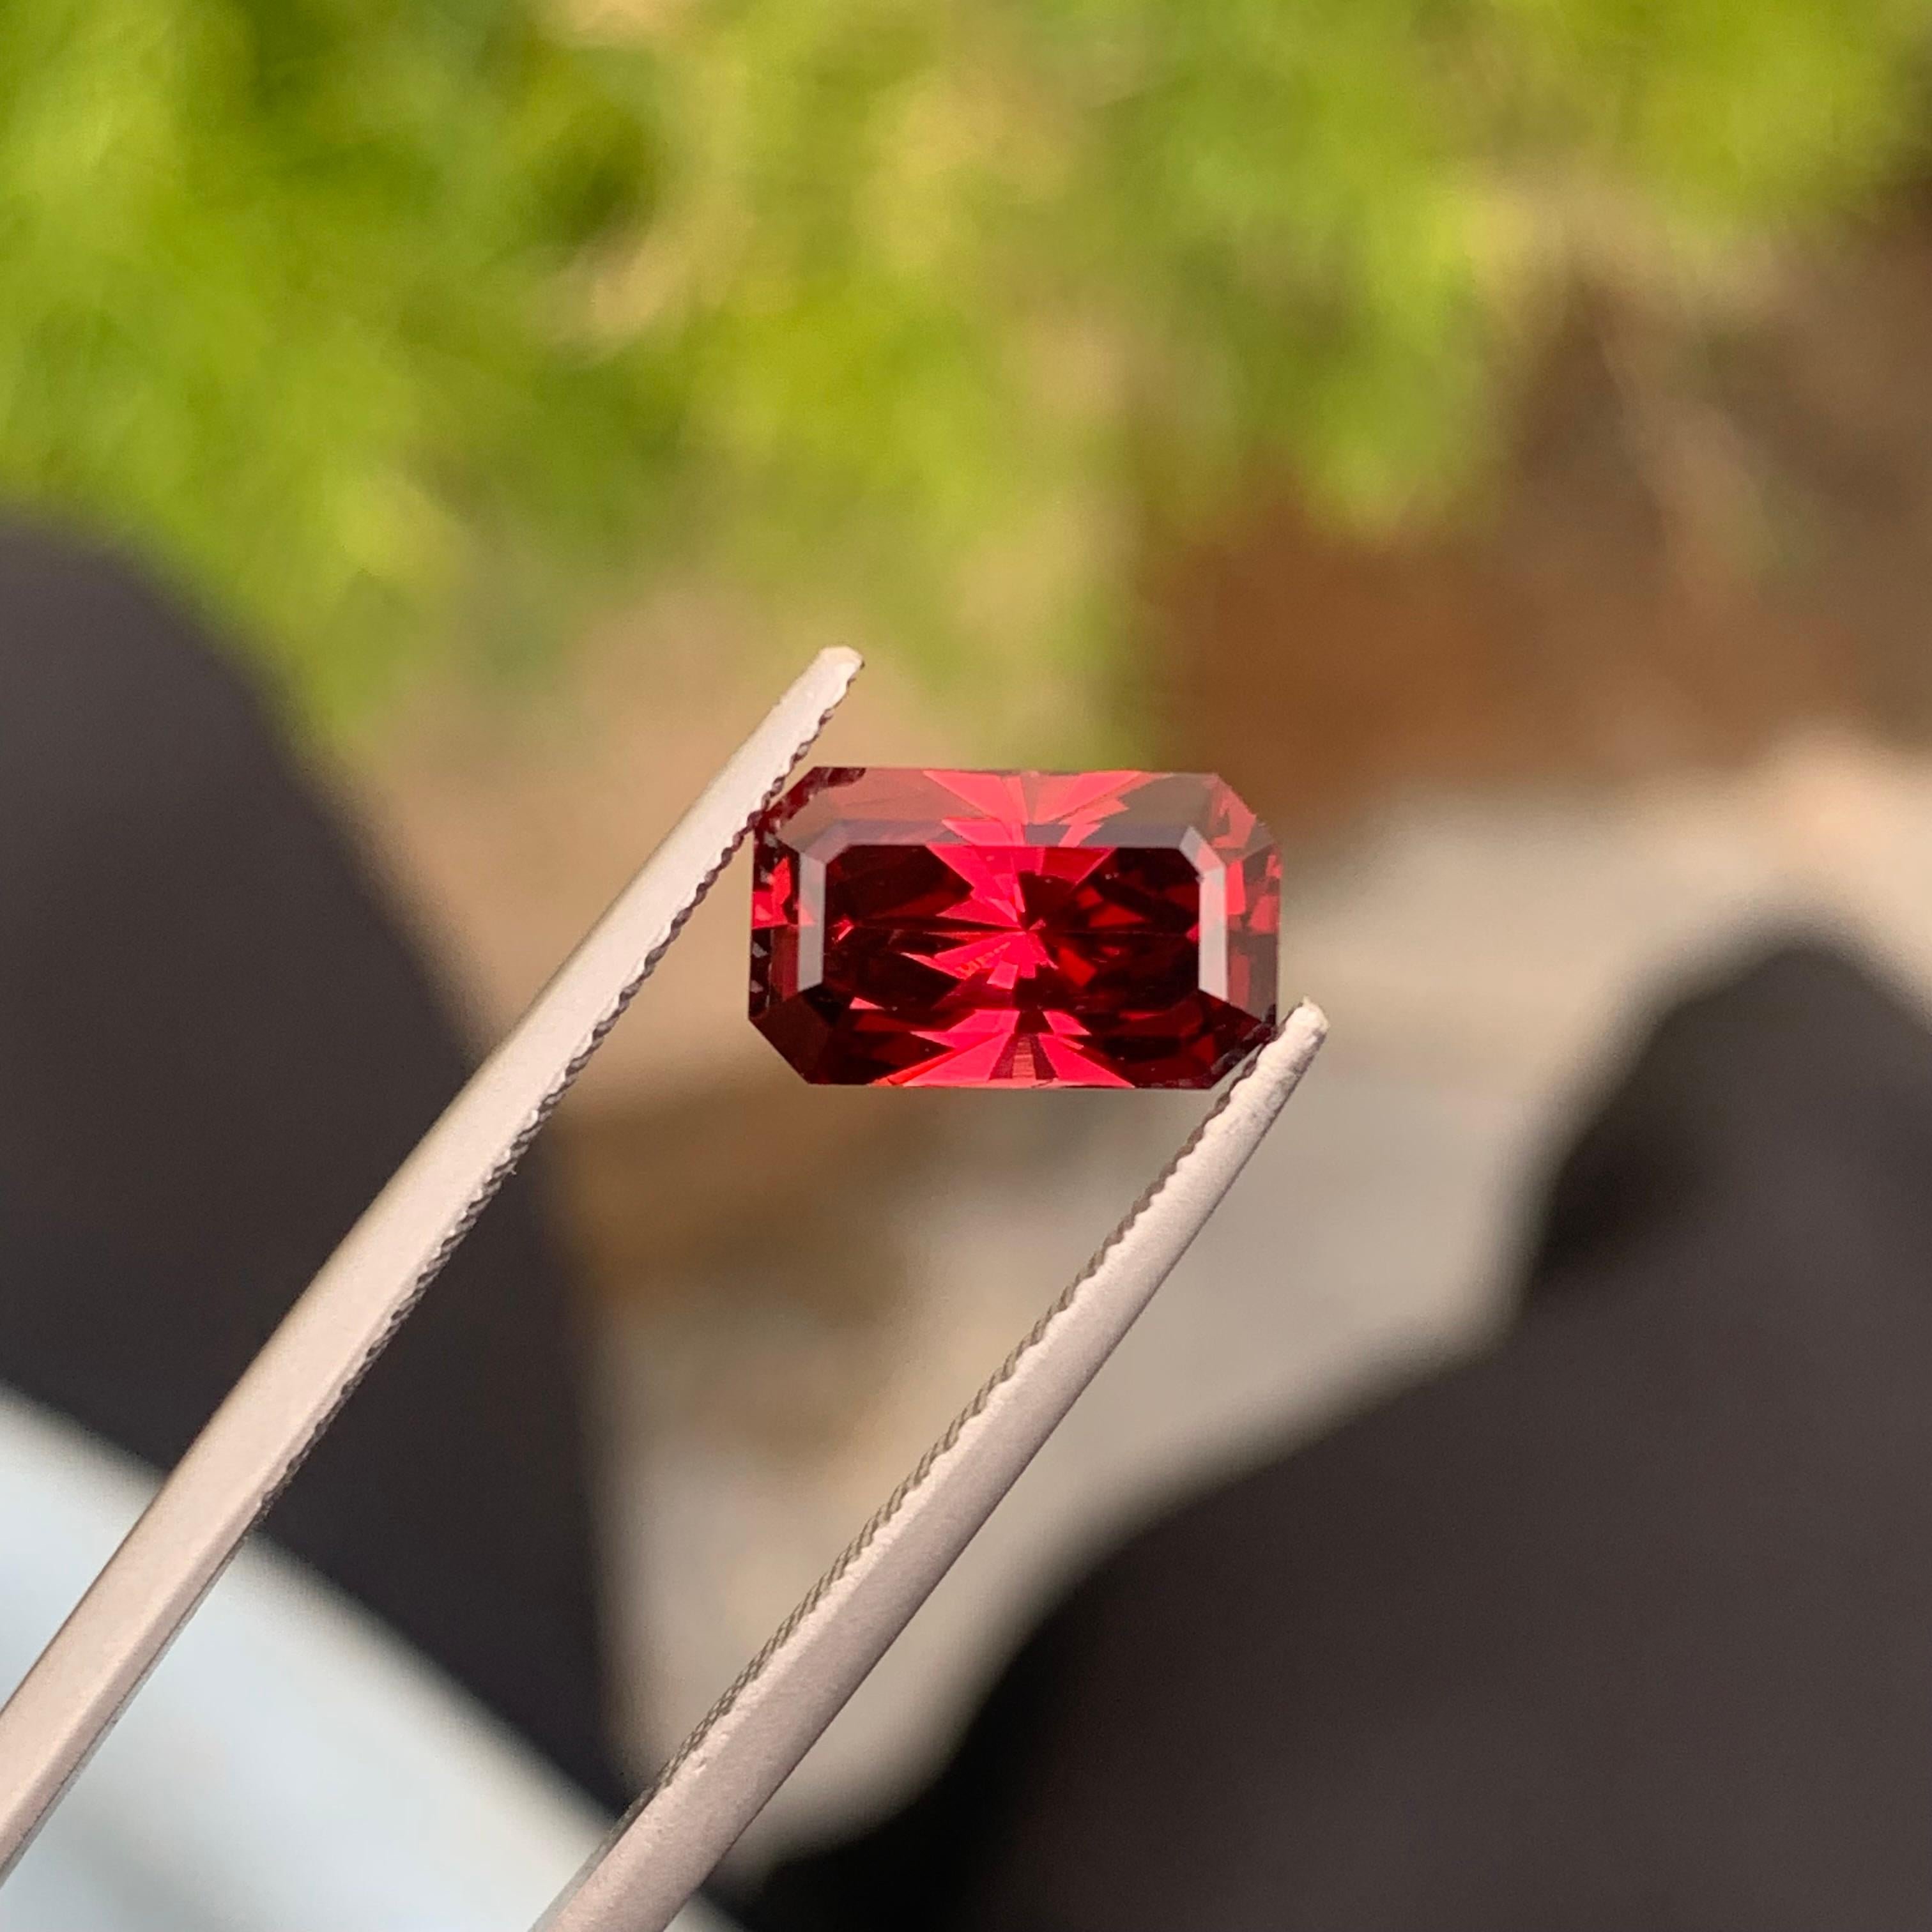 how much do garnets sell for